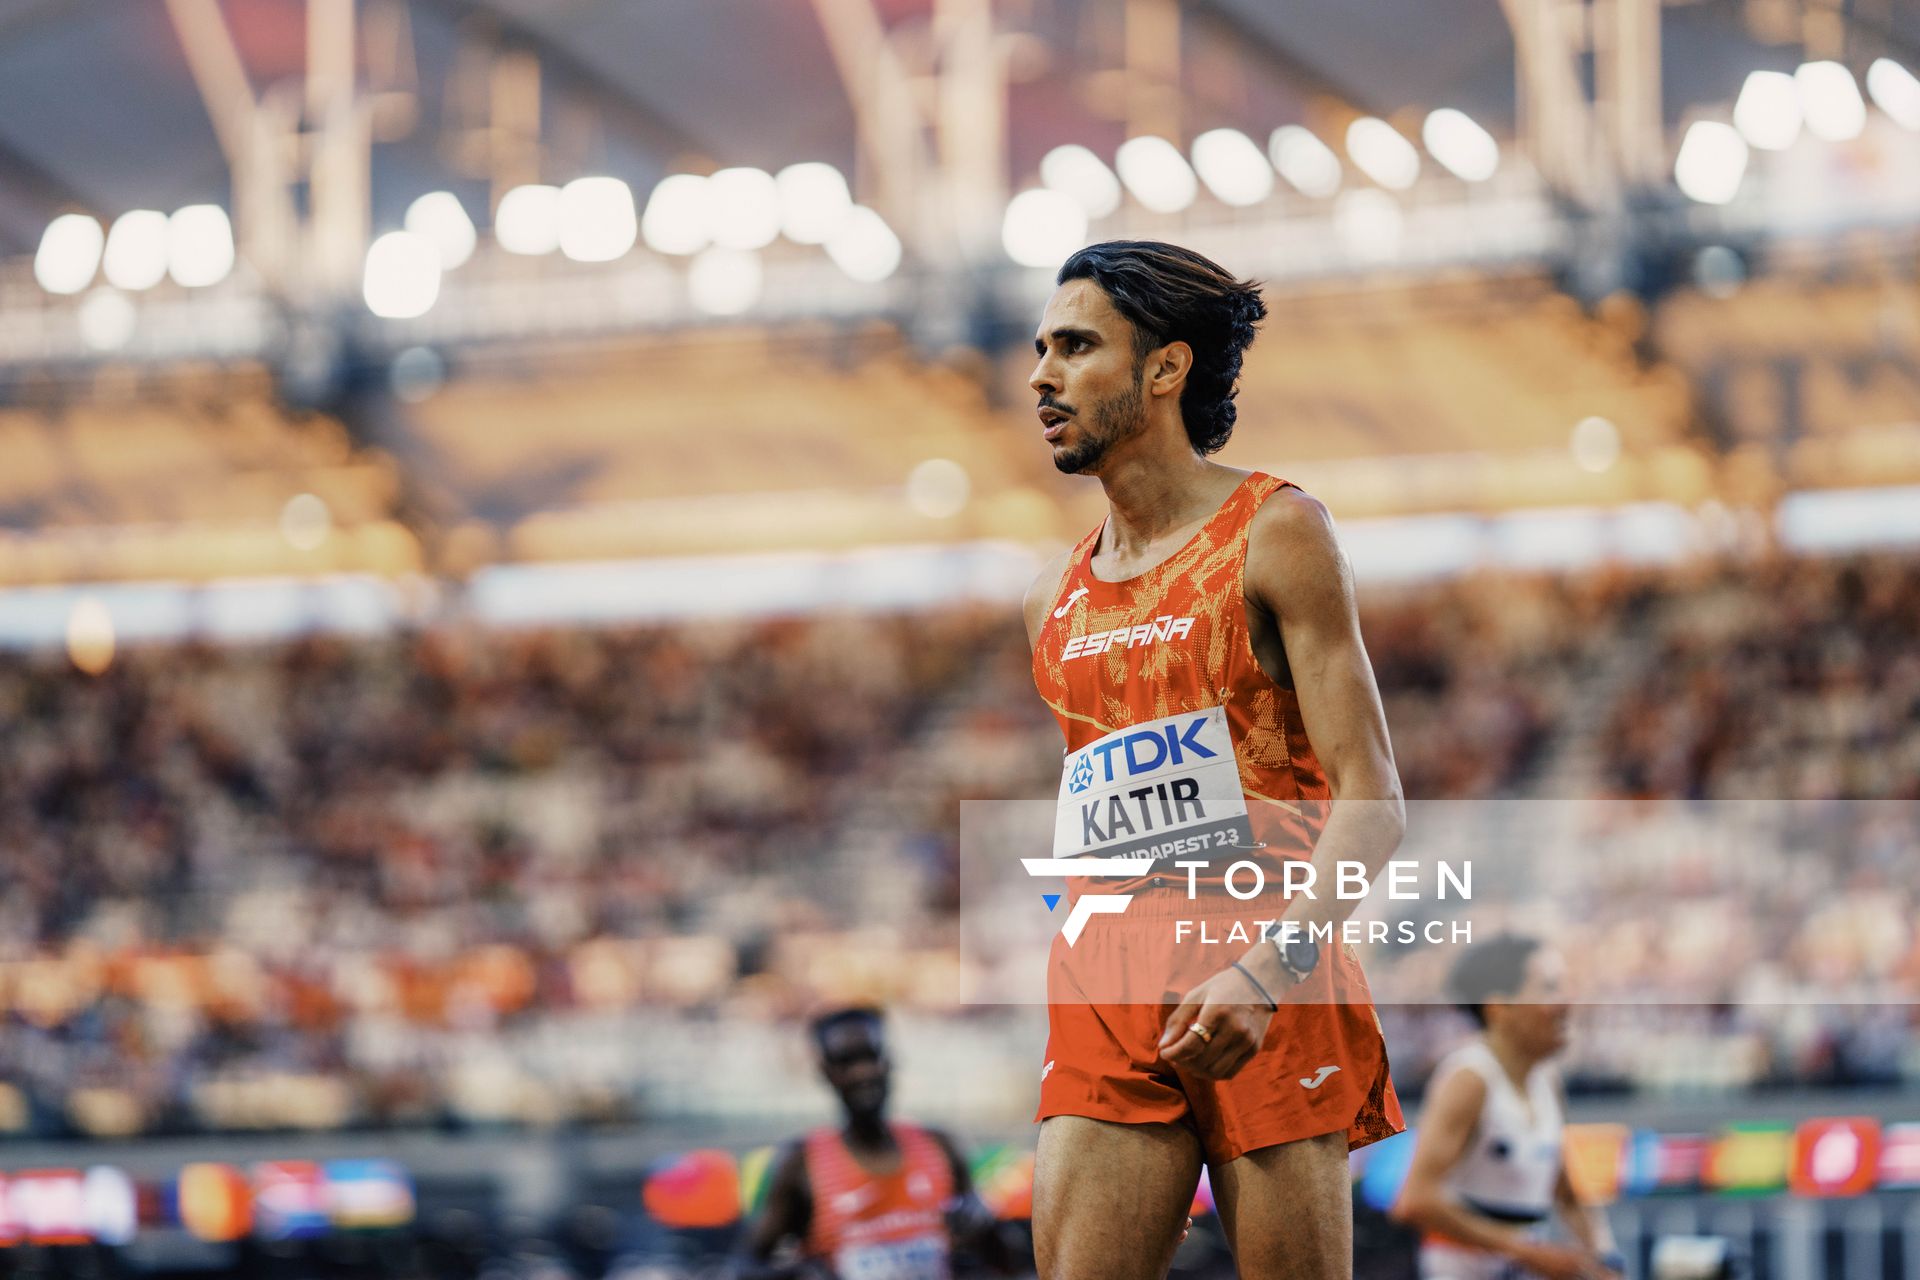 Mohamed Katir (ESP/Spain) during the 5000 Metres Heat on Day 6 of the World Athletics Championships Budapest 23 at the National Athletics Centre in Budapest, Hungary on August 24, 2023.